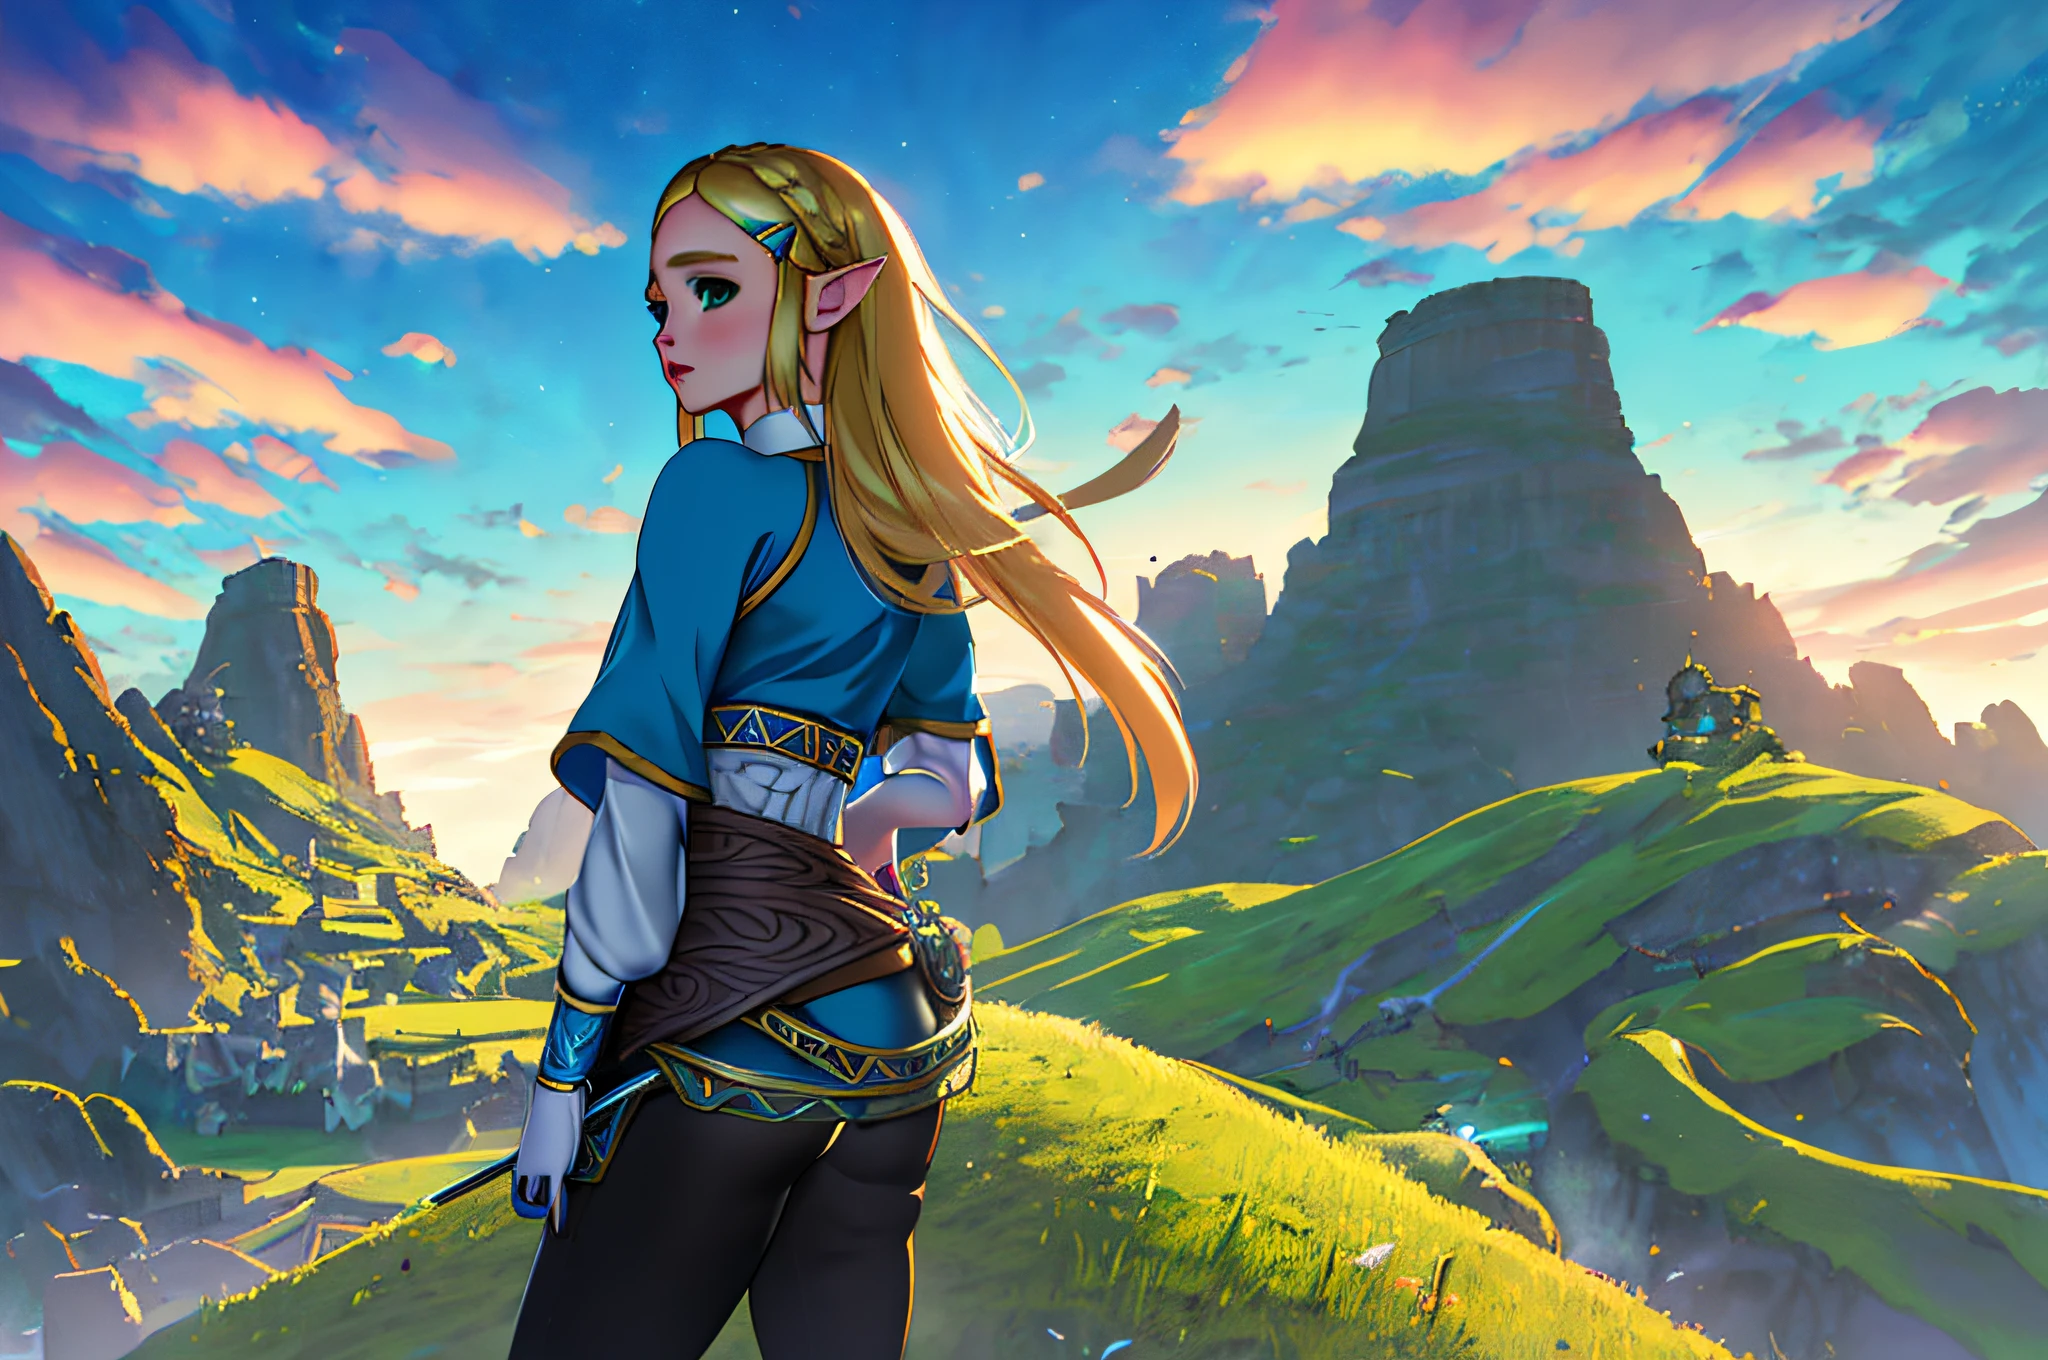 best quality, 4k, high resolution, masterpiece: 1.2, ultra detailed, realistic, photorealistic: 1.37,anime: painting style, we see Link, character from the Zelda game, standing on a cliff overlooking a city, in front of a fantasy city, 2.5d cgi anime fantasy illustrations, breath of the wild art style , highly detailed official art illustrations, botw, 4k highly detailed digital art, ross tran. scenic background, zelda botw, 8k high quality detailed art, hyrule, amazing wallpaper